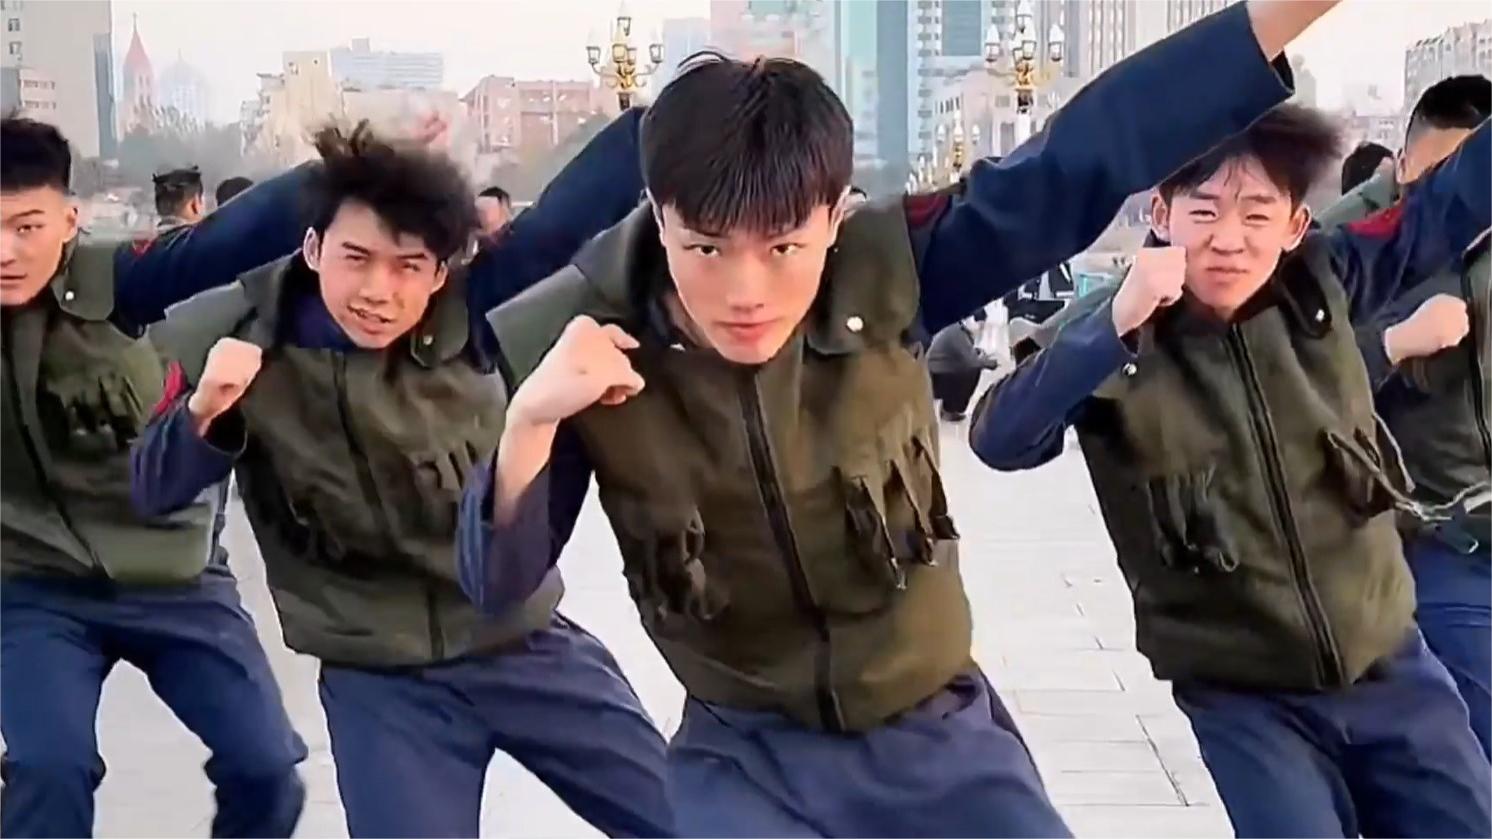 'Subject Three' dance: Why did it go viral?